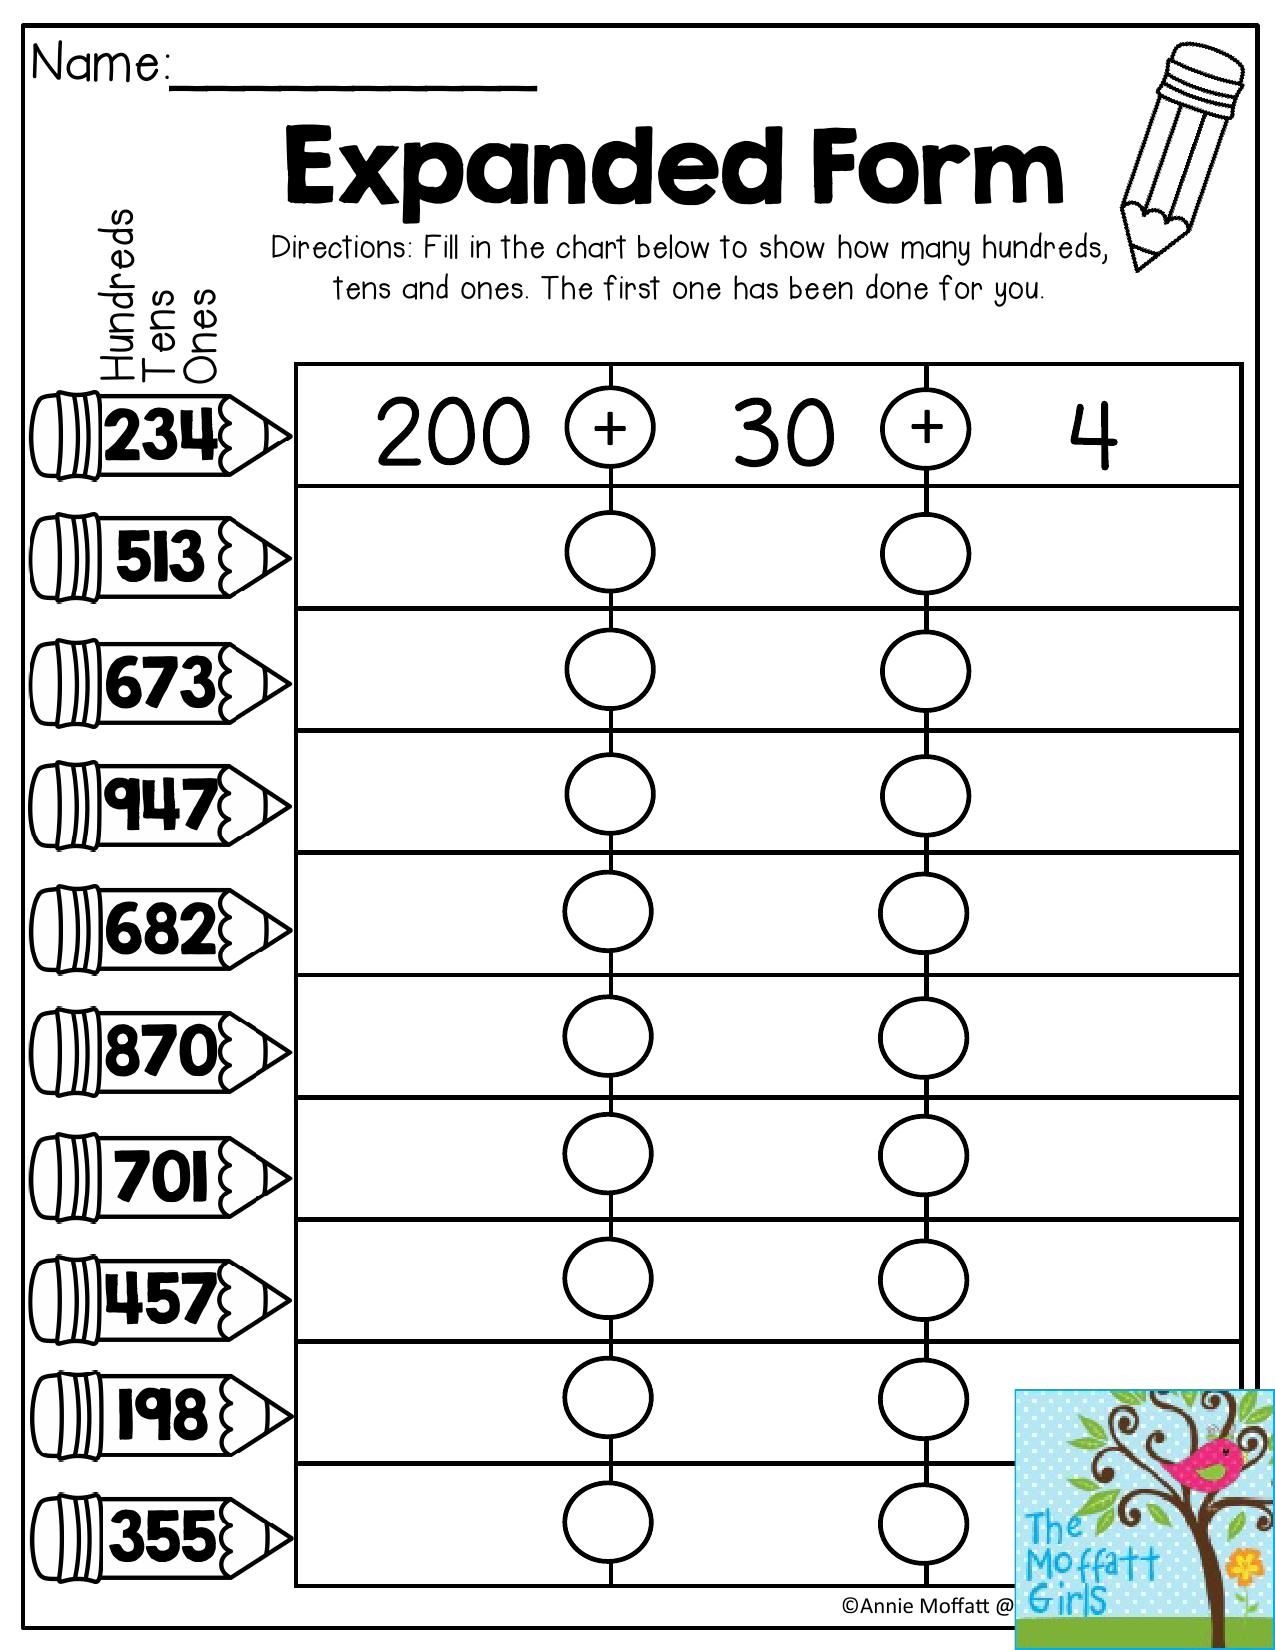 Expanded Form- Fill In The Chart To Show How Many Hundreds, Tens And - Free Printable Place Value Chart In Spanish